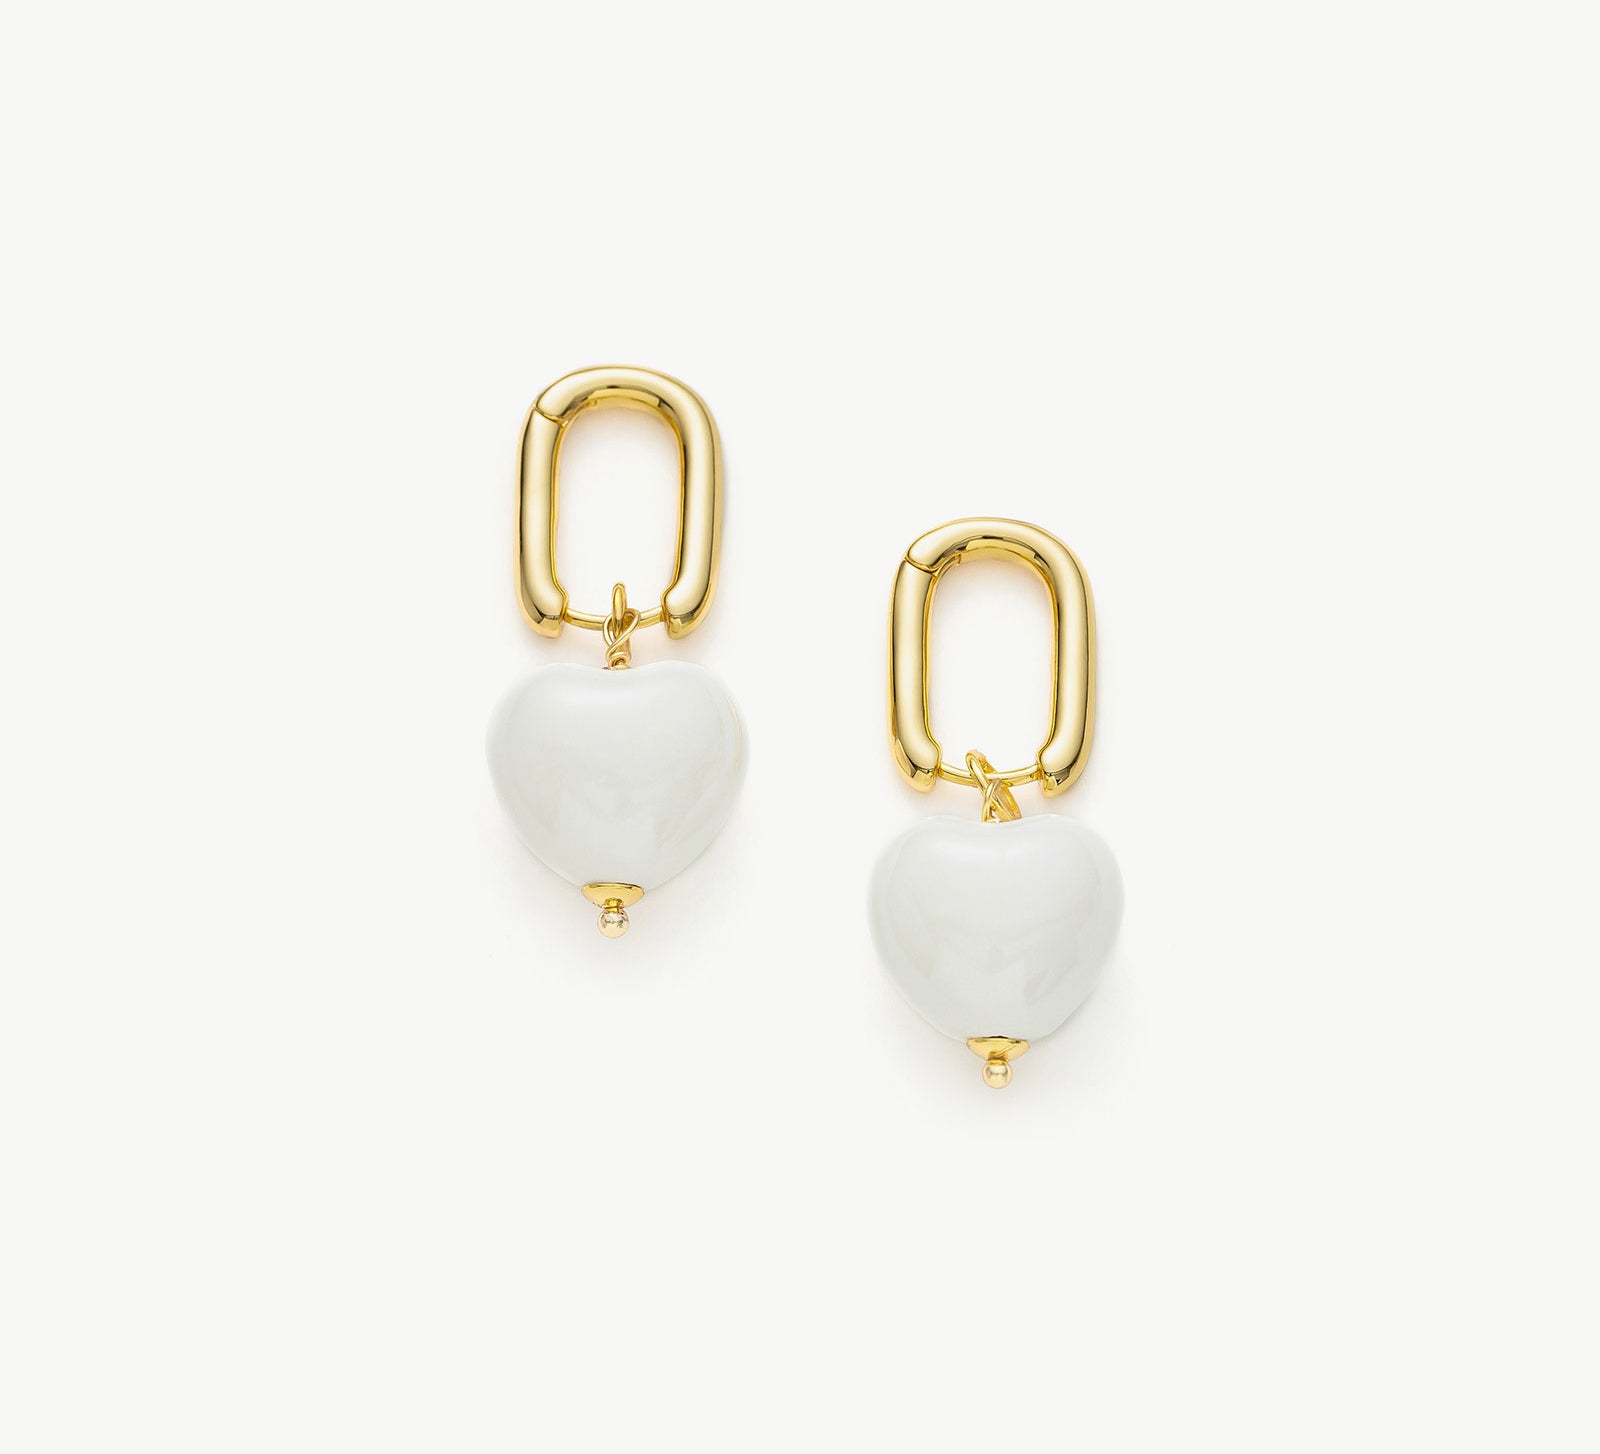  Ceramics Heart Hoop Earrings in White, an elegant and pure accessory featuring heart-shaped hoops in a pristine and timeless white hue